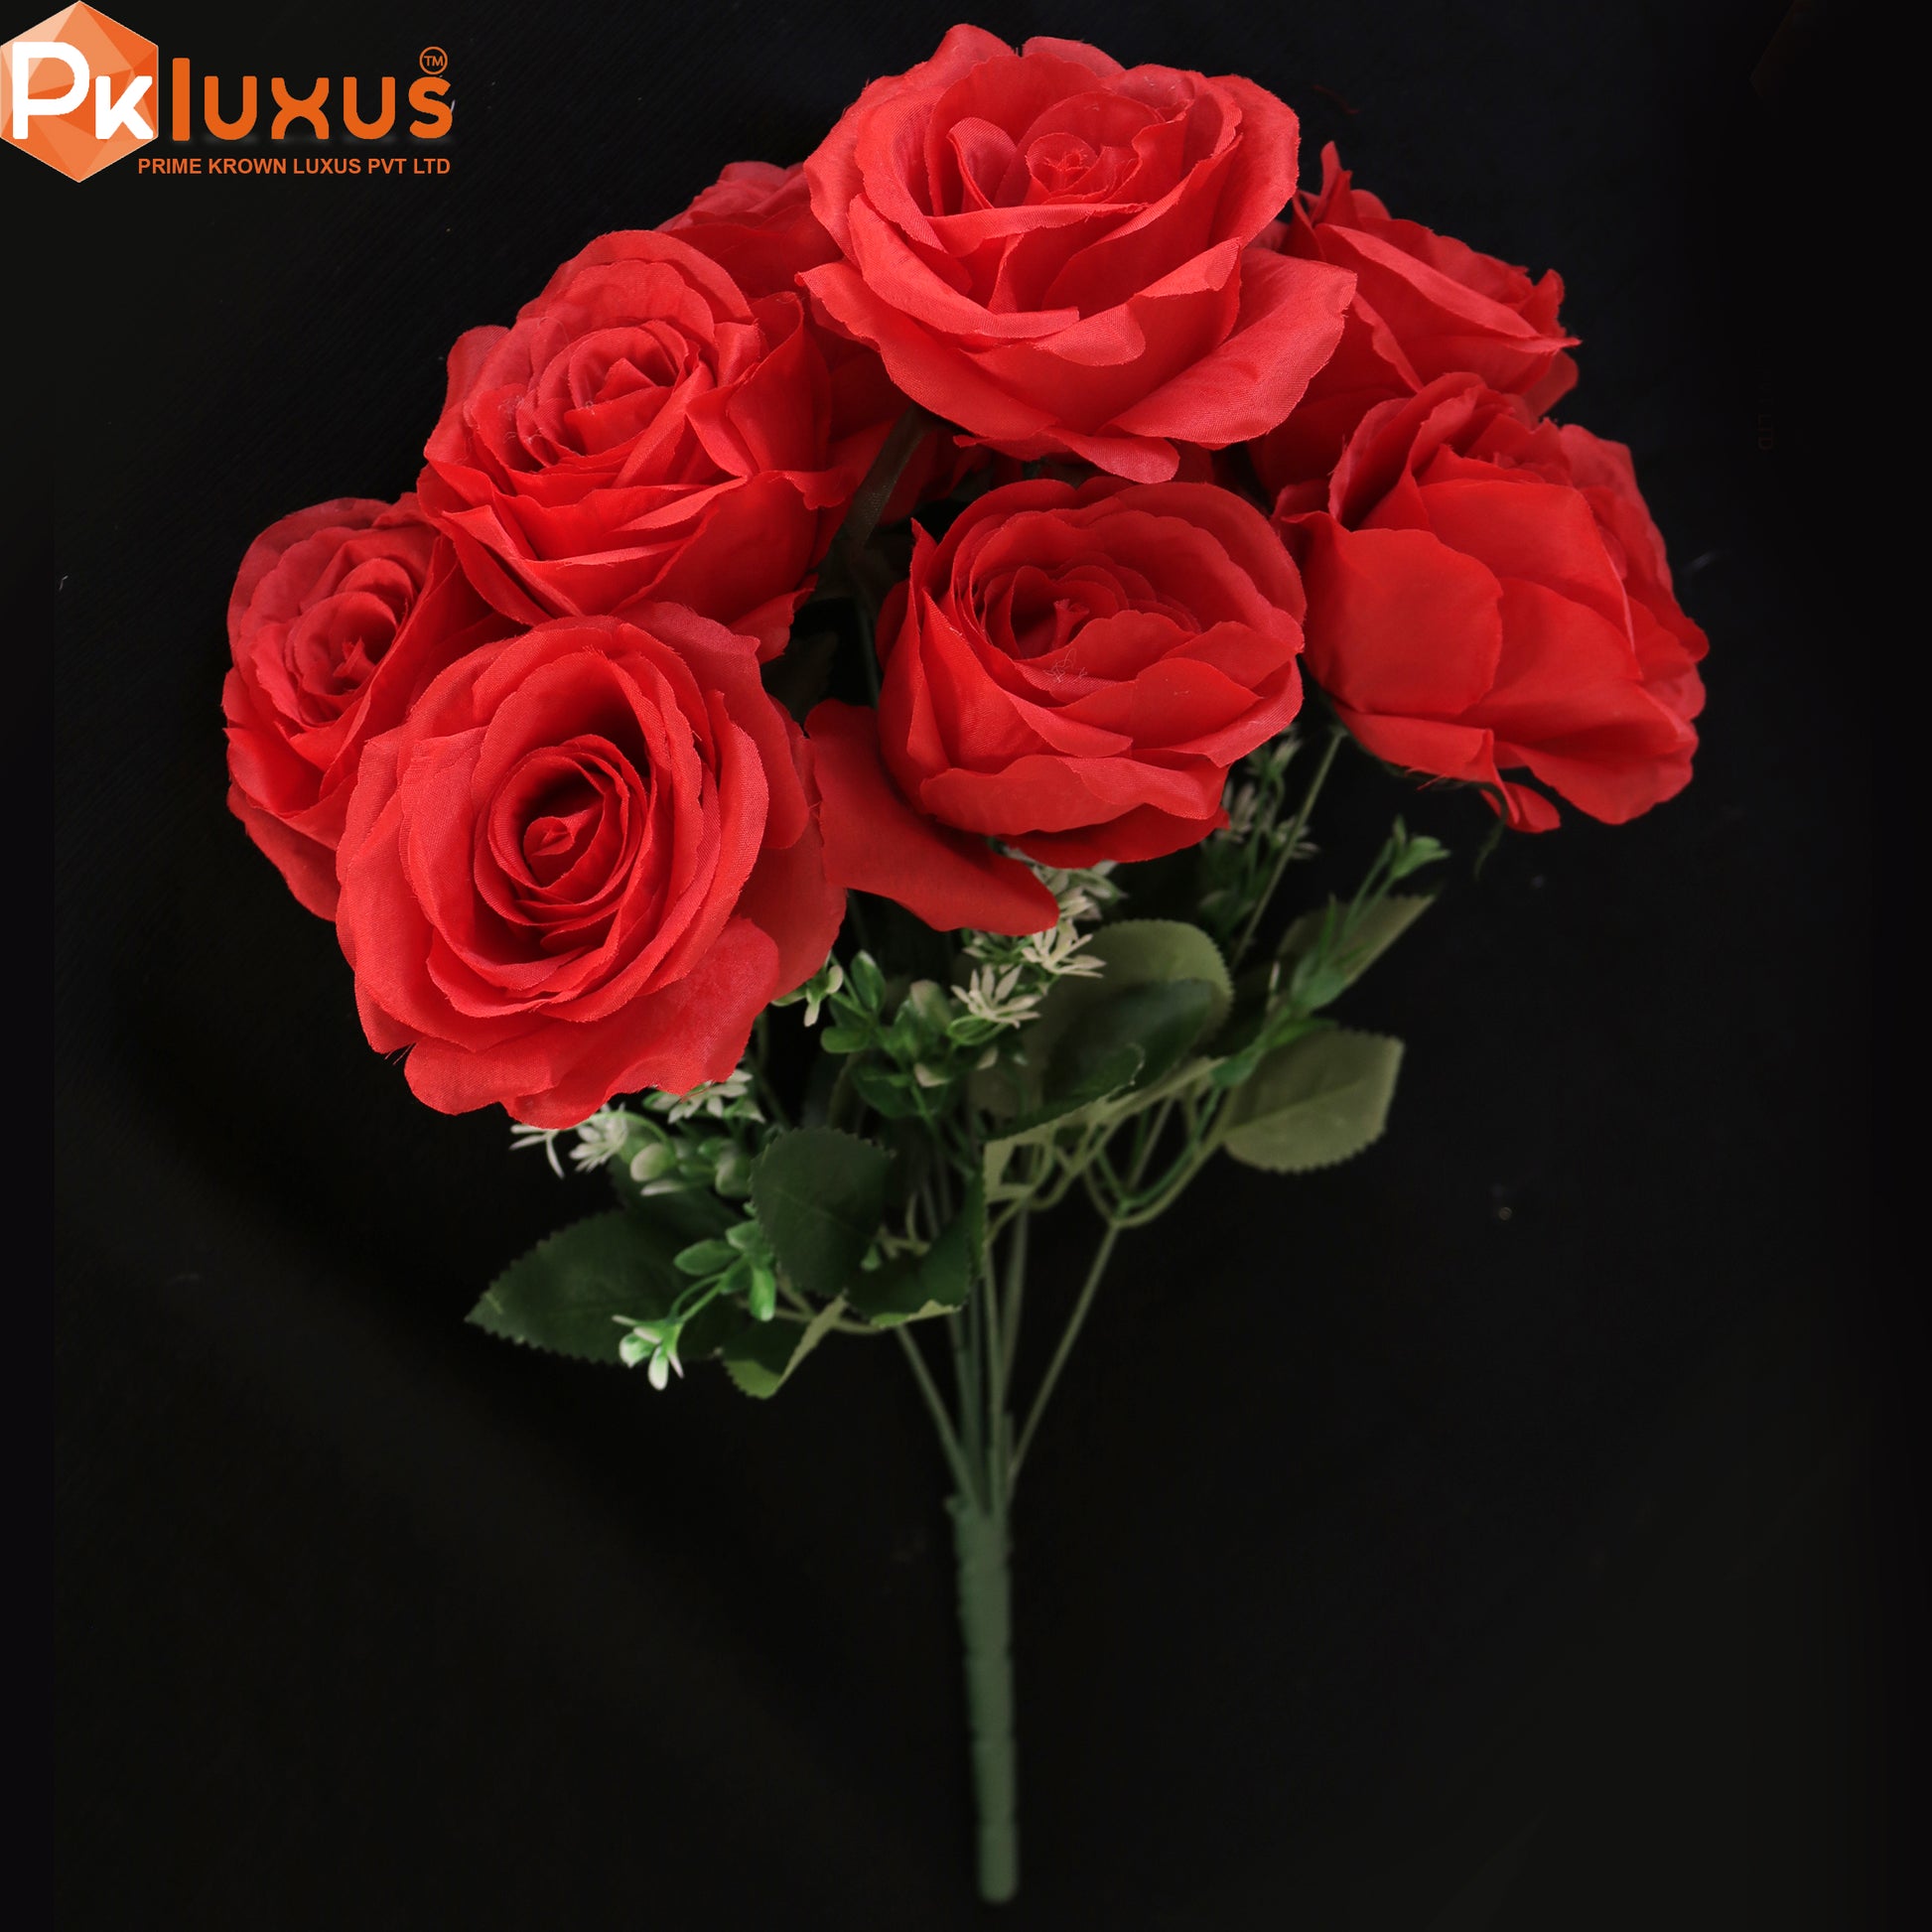 18 Inches Red Roses Bunch | PK LUXUS™ - PK LUXUS